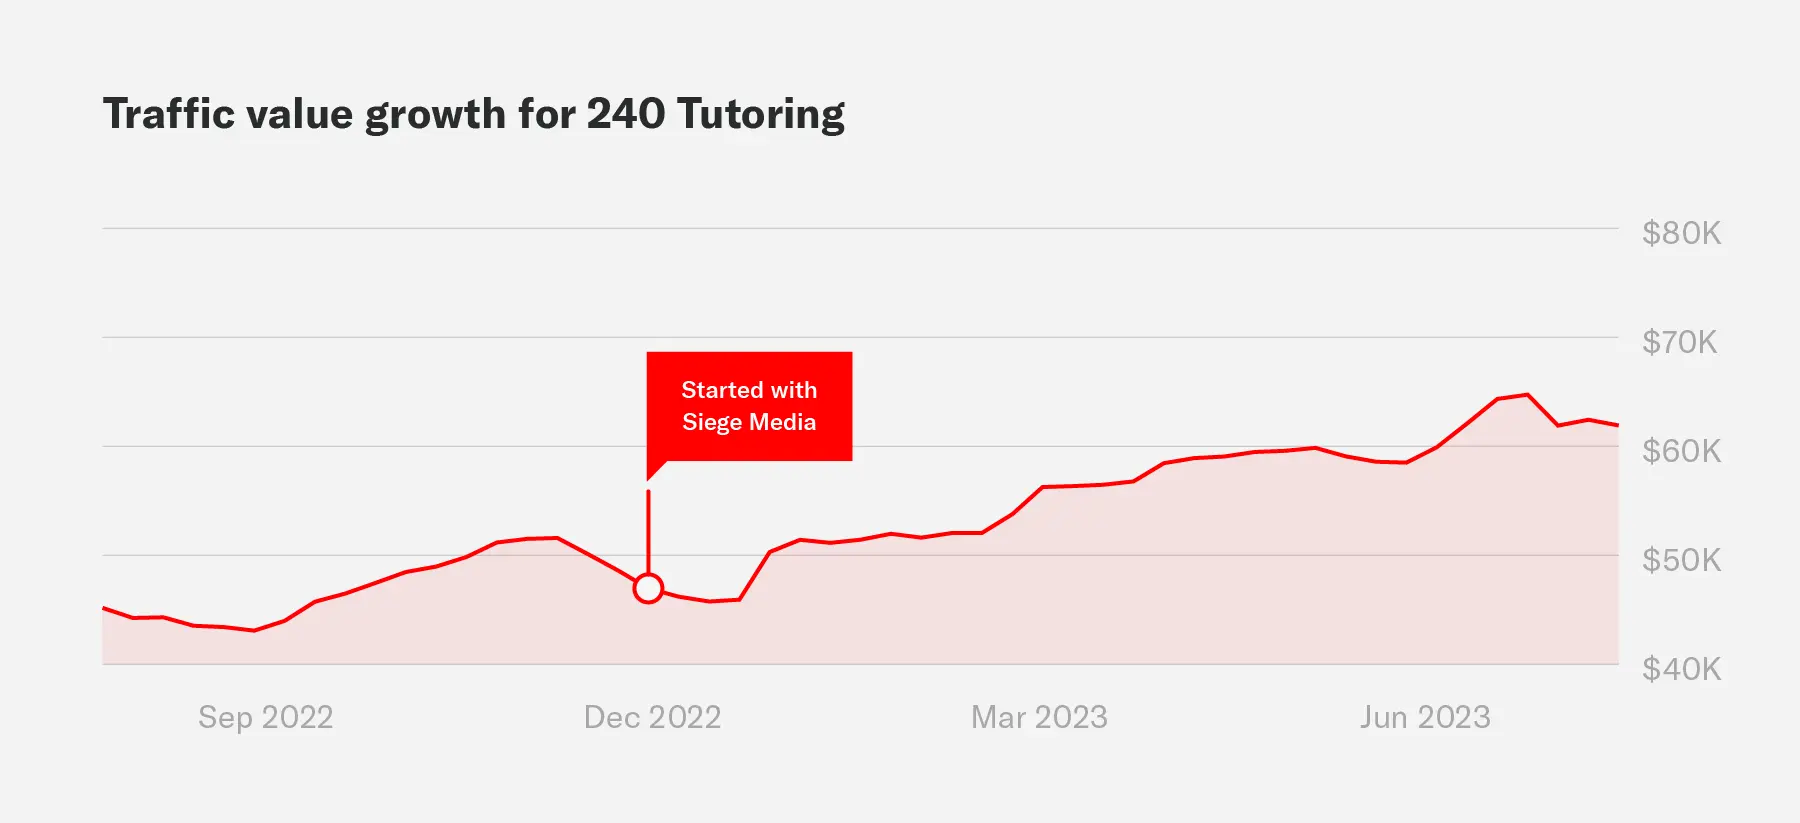 A chart showing the organic traffic value growth for 240 tutoring during an engagement with Siege Media.